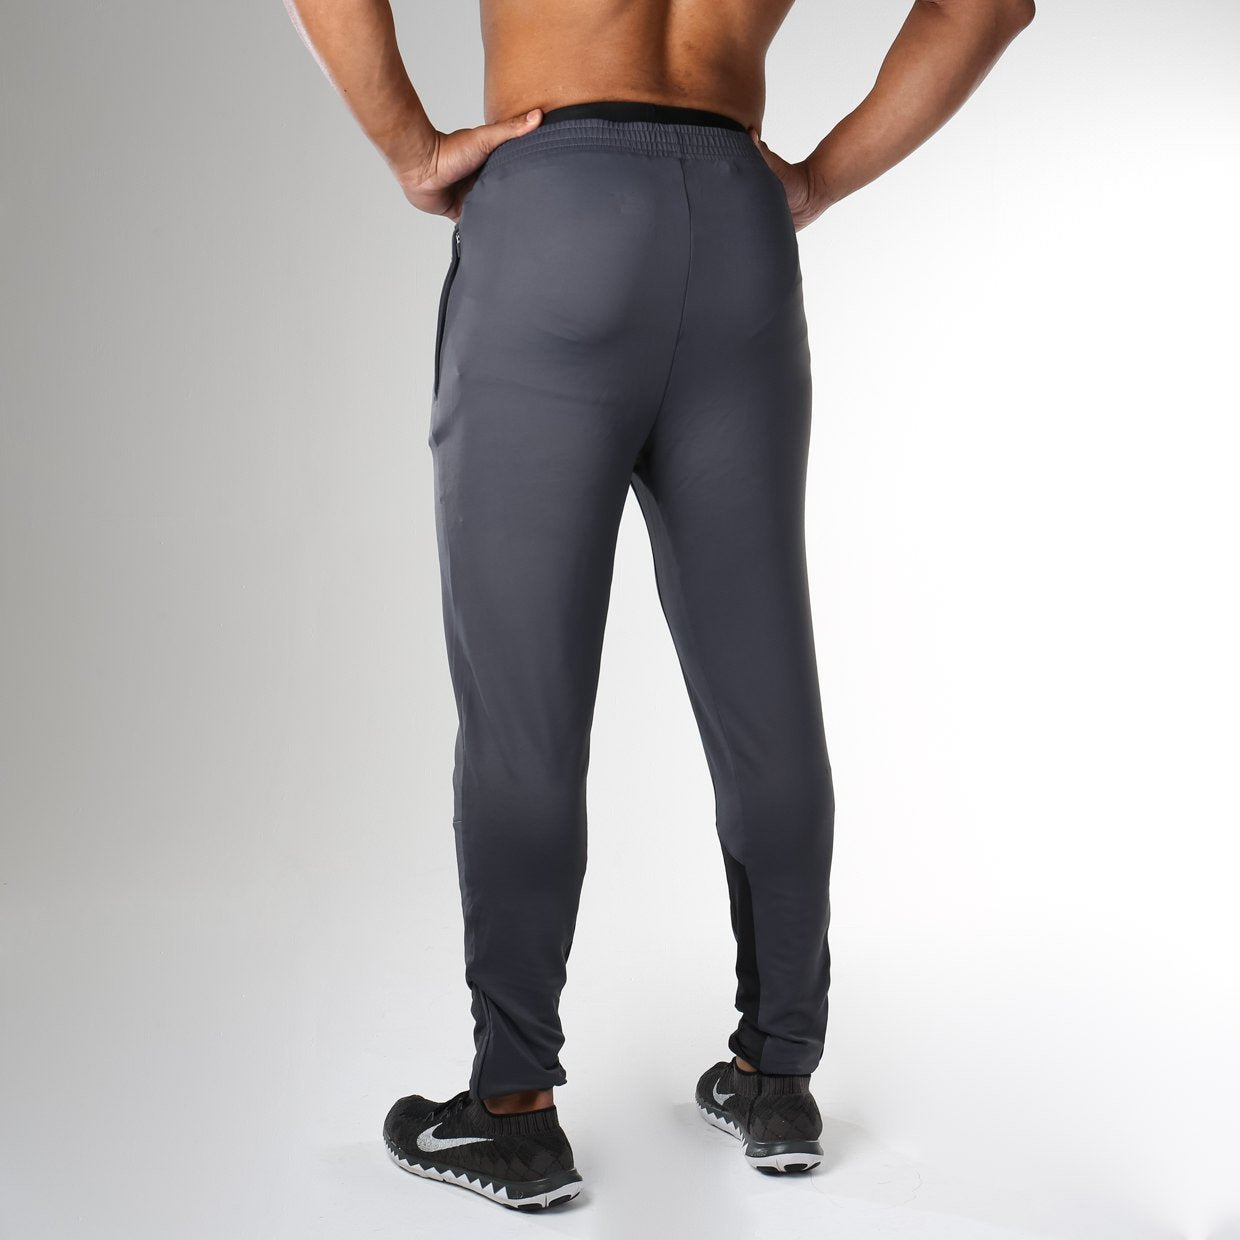 Reactive Training Pant in Charcoal/Black - view 4